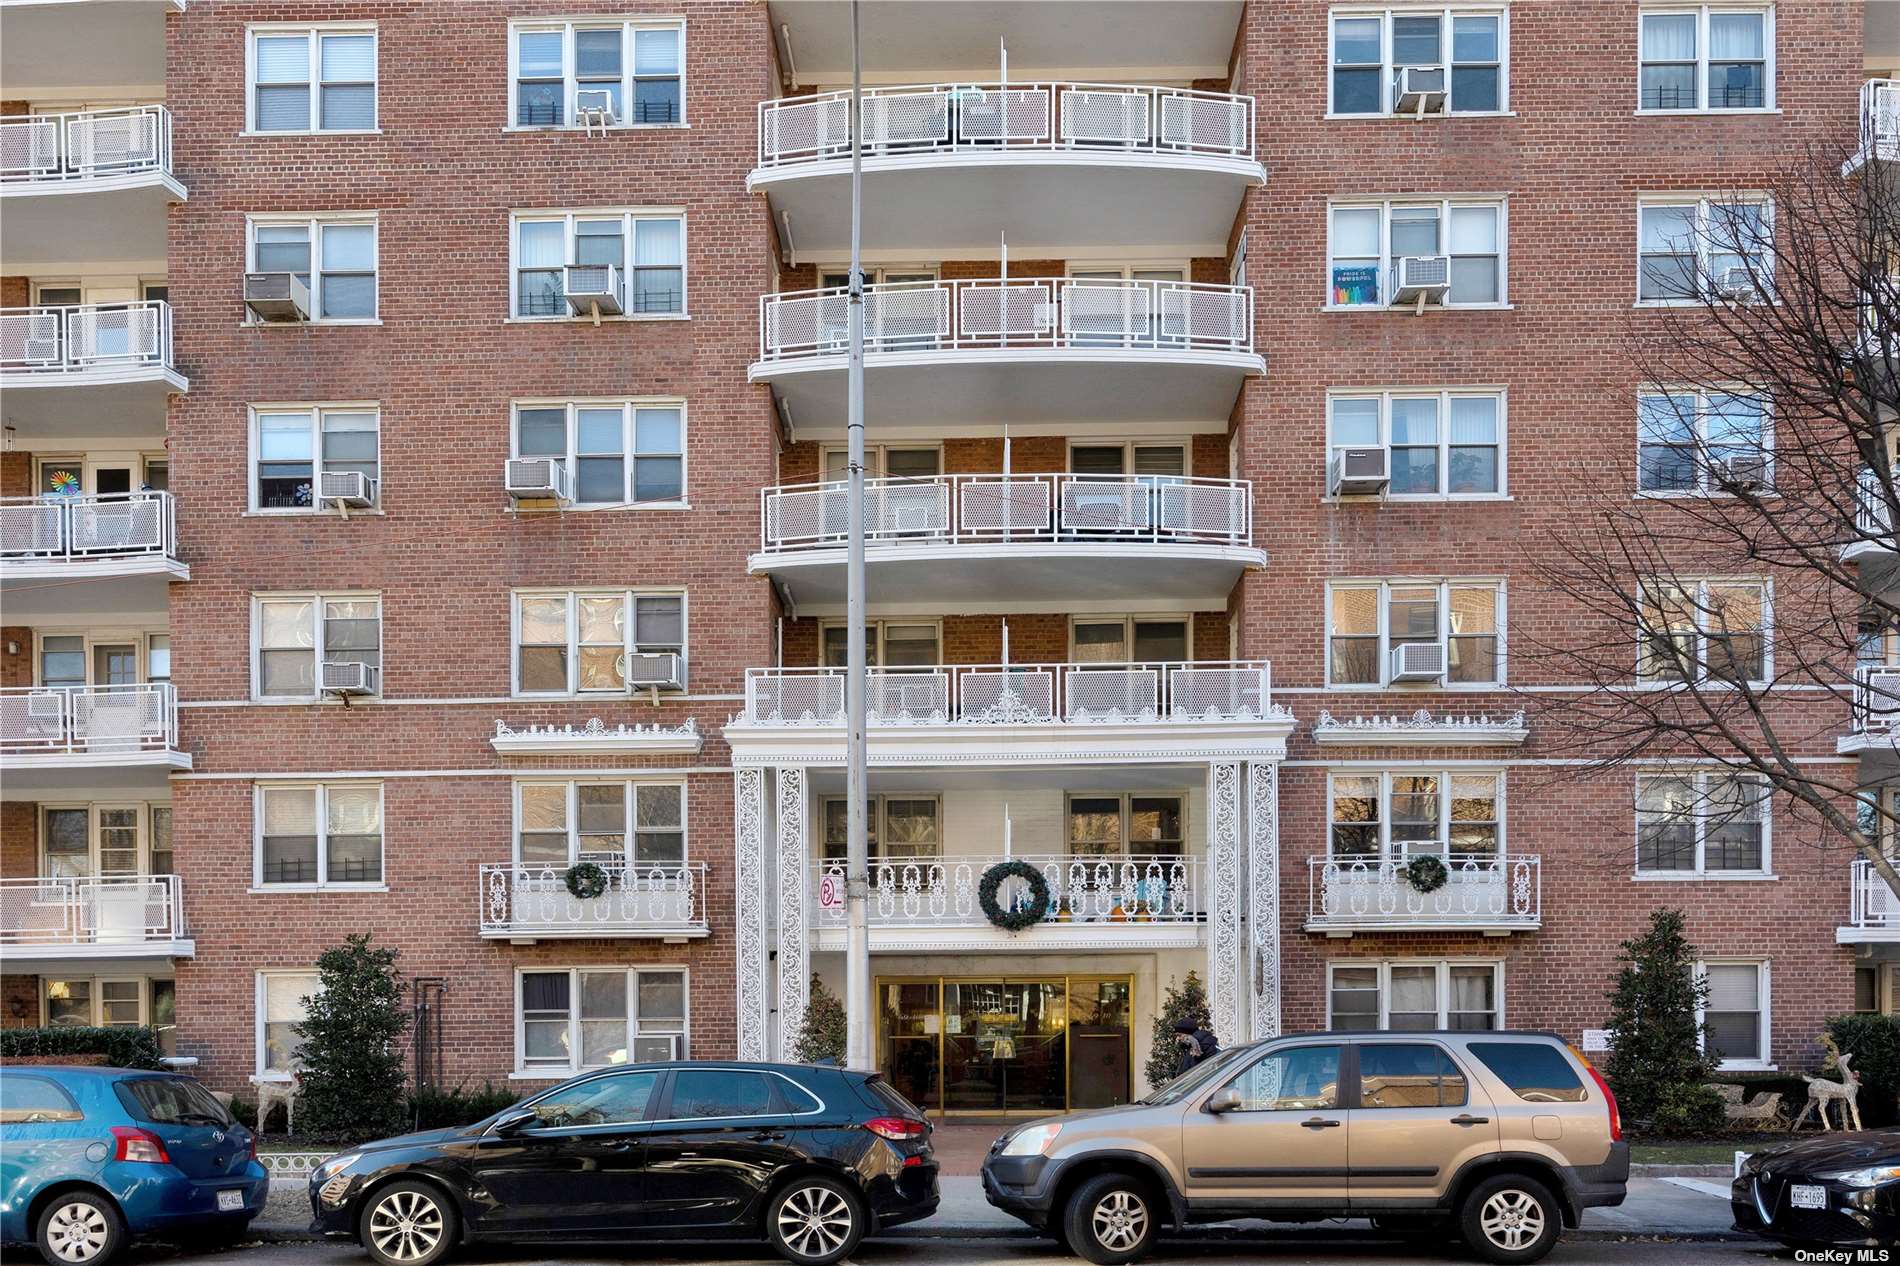 Coop in Forest Hills - 108 St  Queens, NY 11375